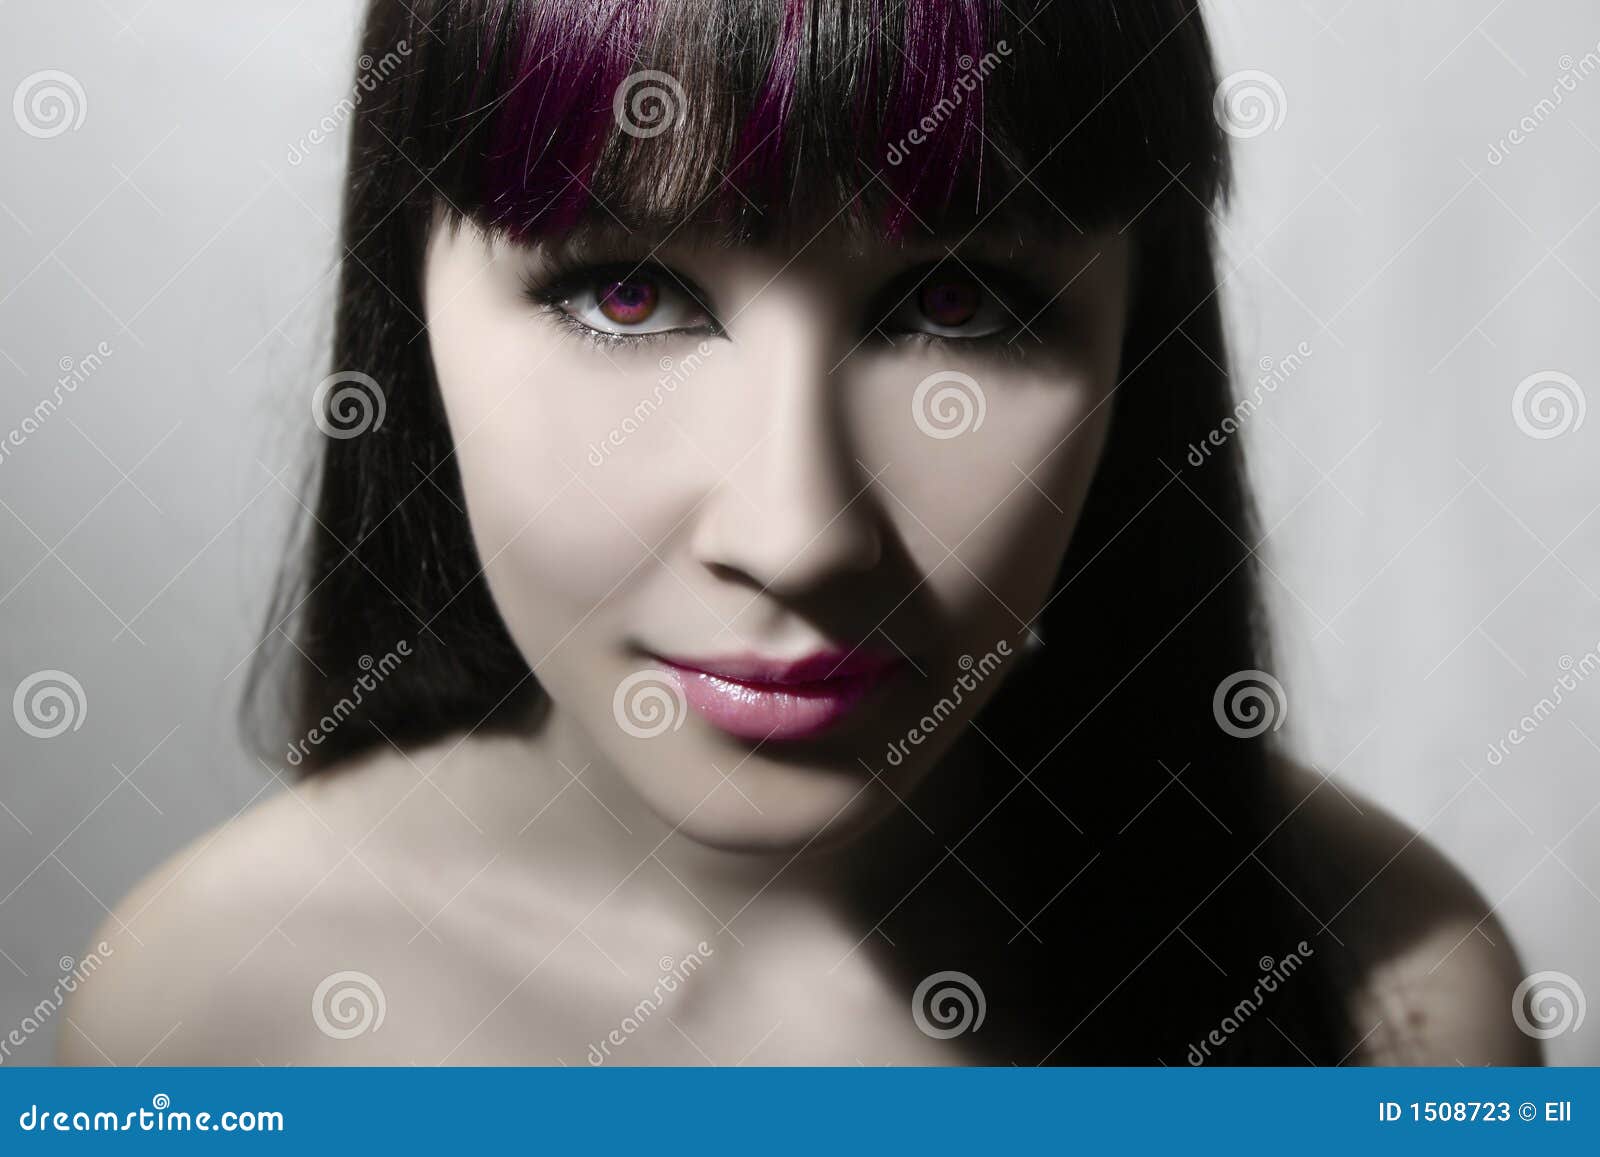 Download this Stock Photos Beautiful... picture